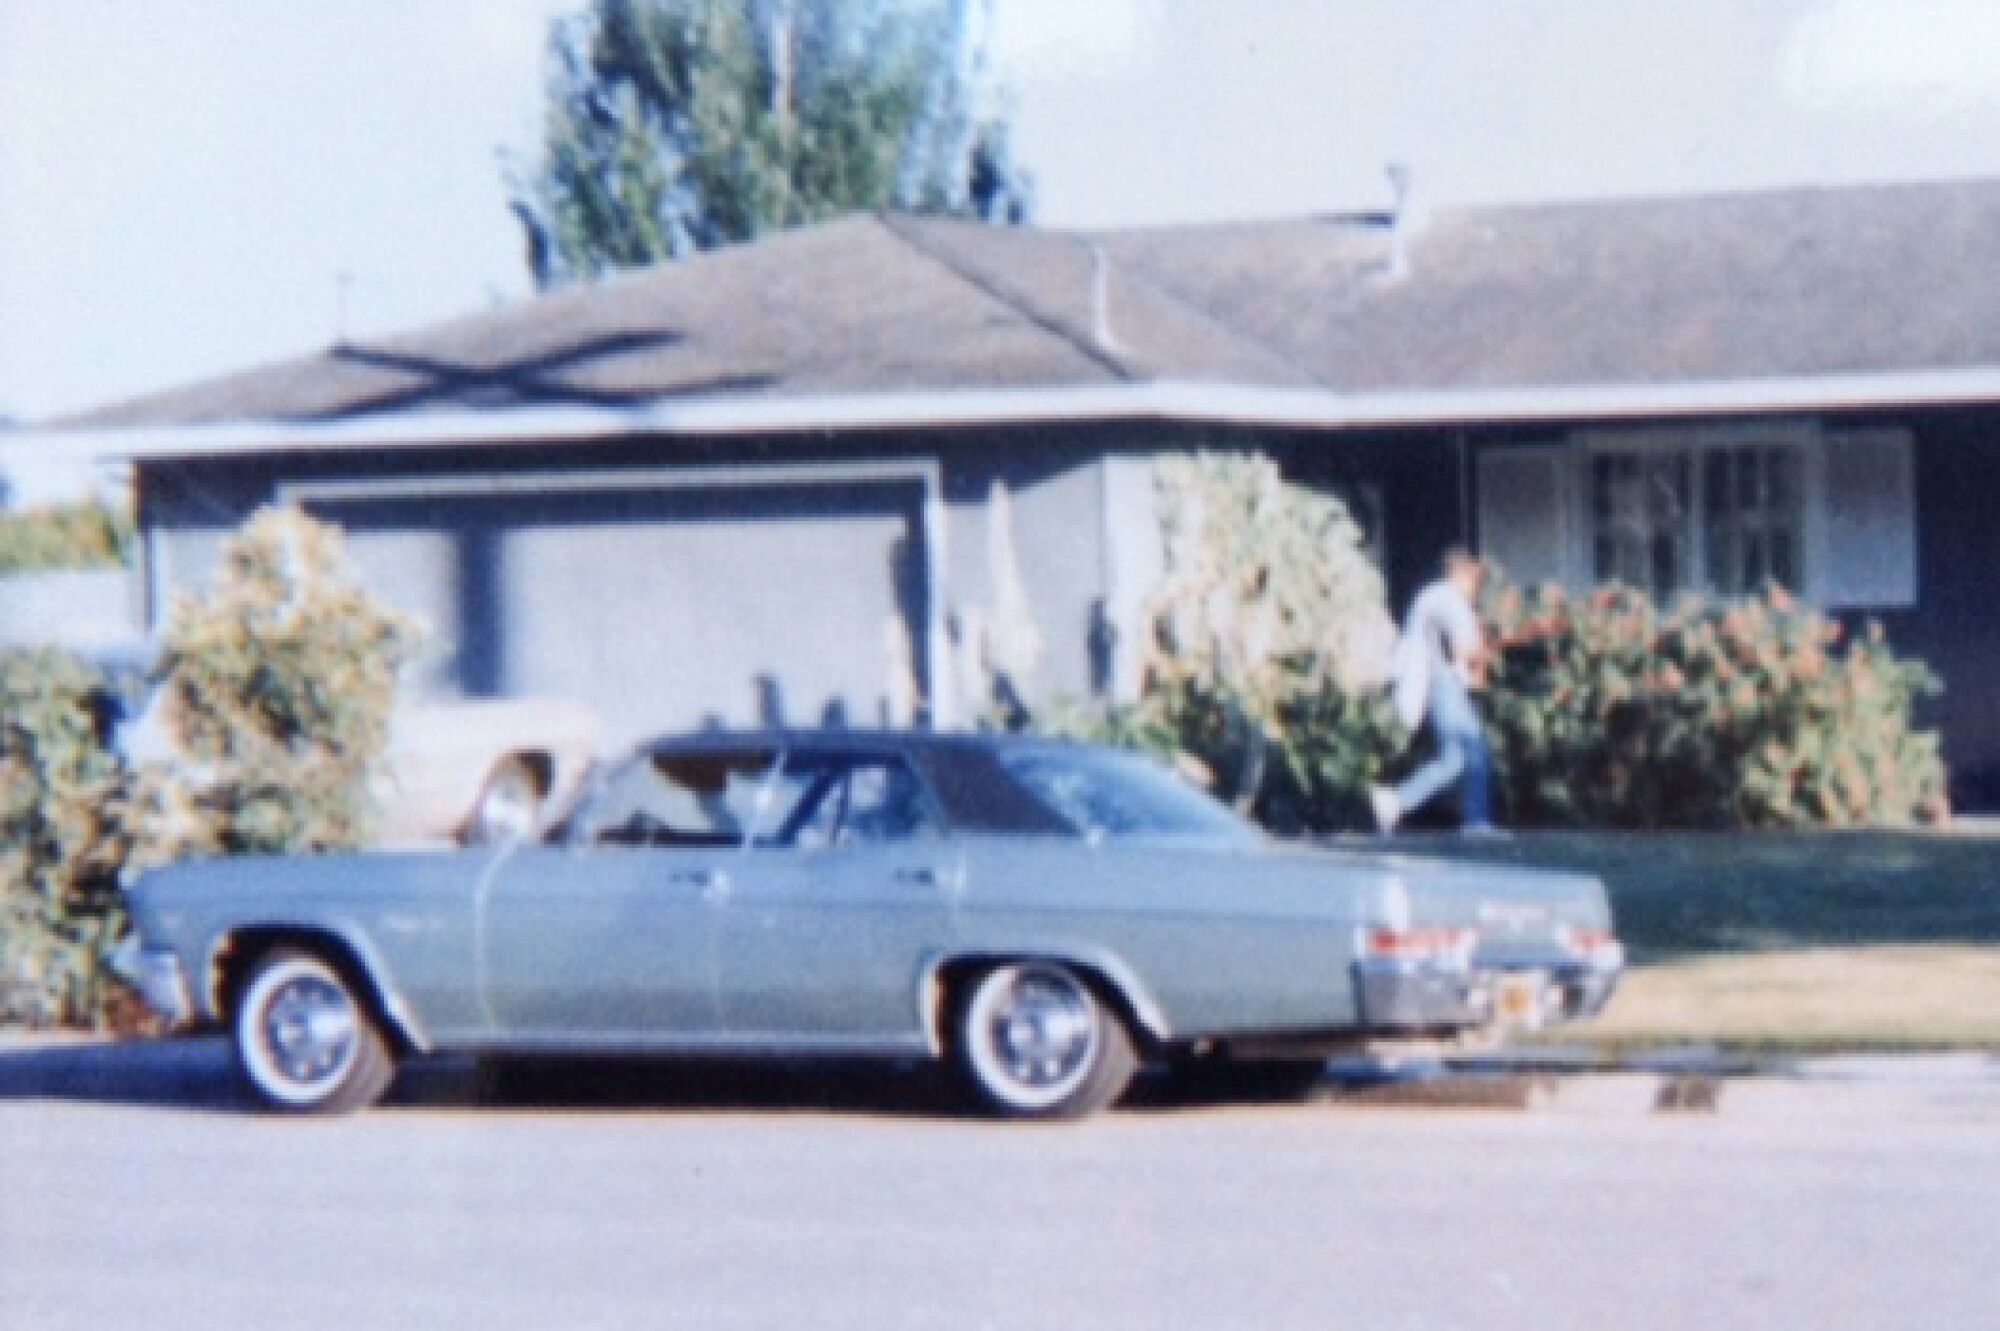 A blue 1966 Chevy Impala parked on the street